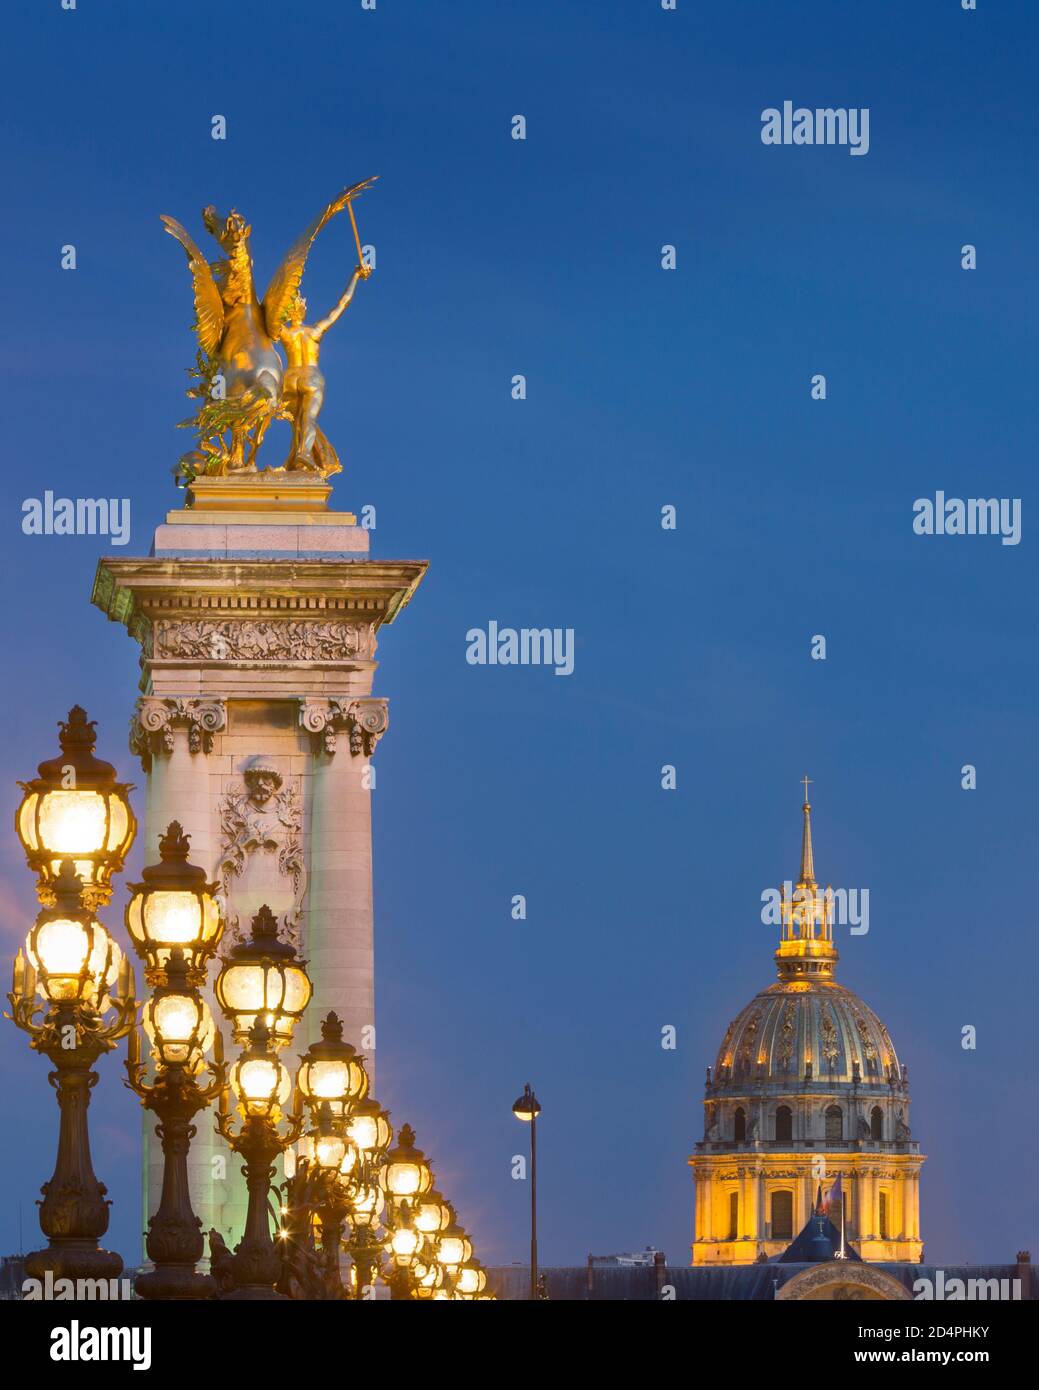 Row of lampposts along Pont Alexandre III with dome of Hotel des Invalides beyond, Paris, France Stock Photo